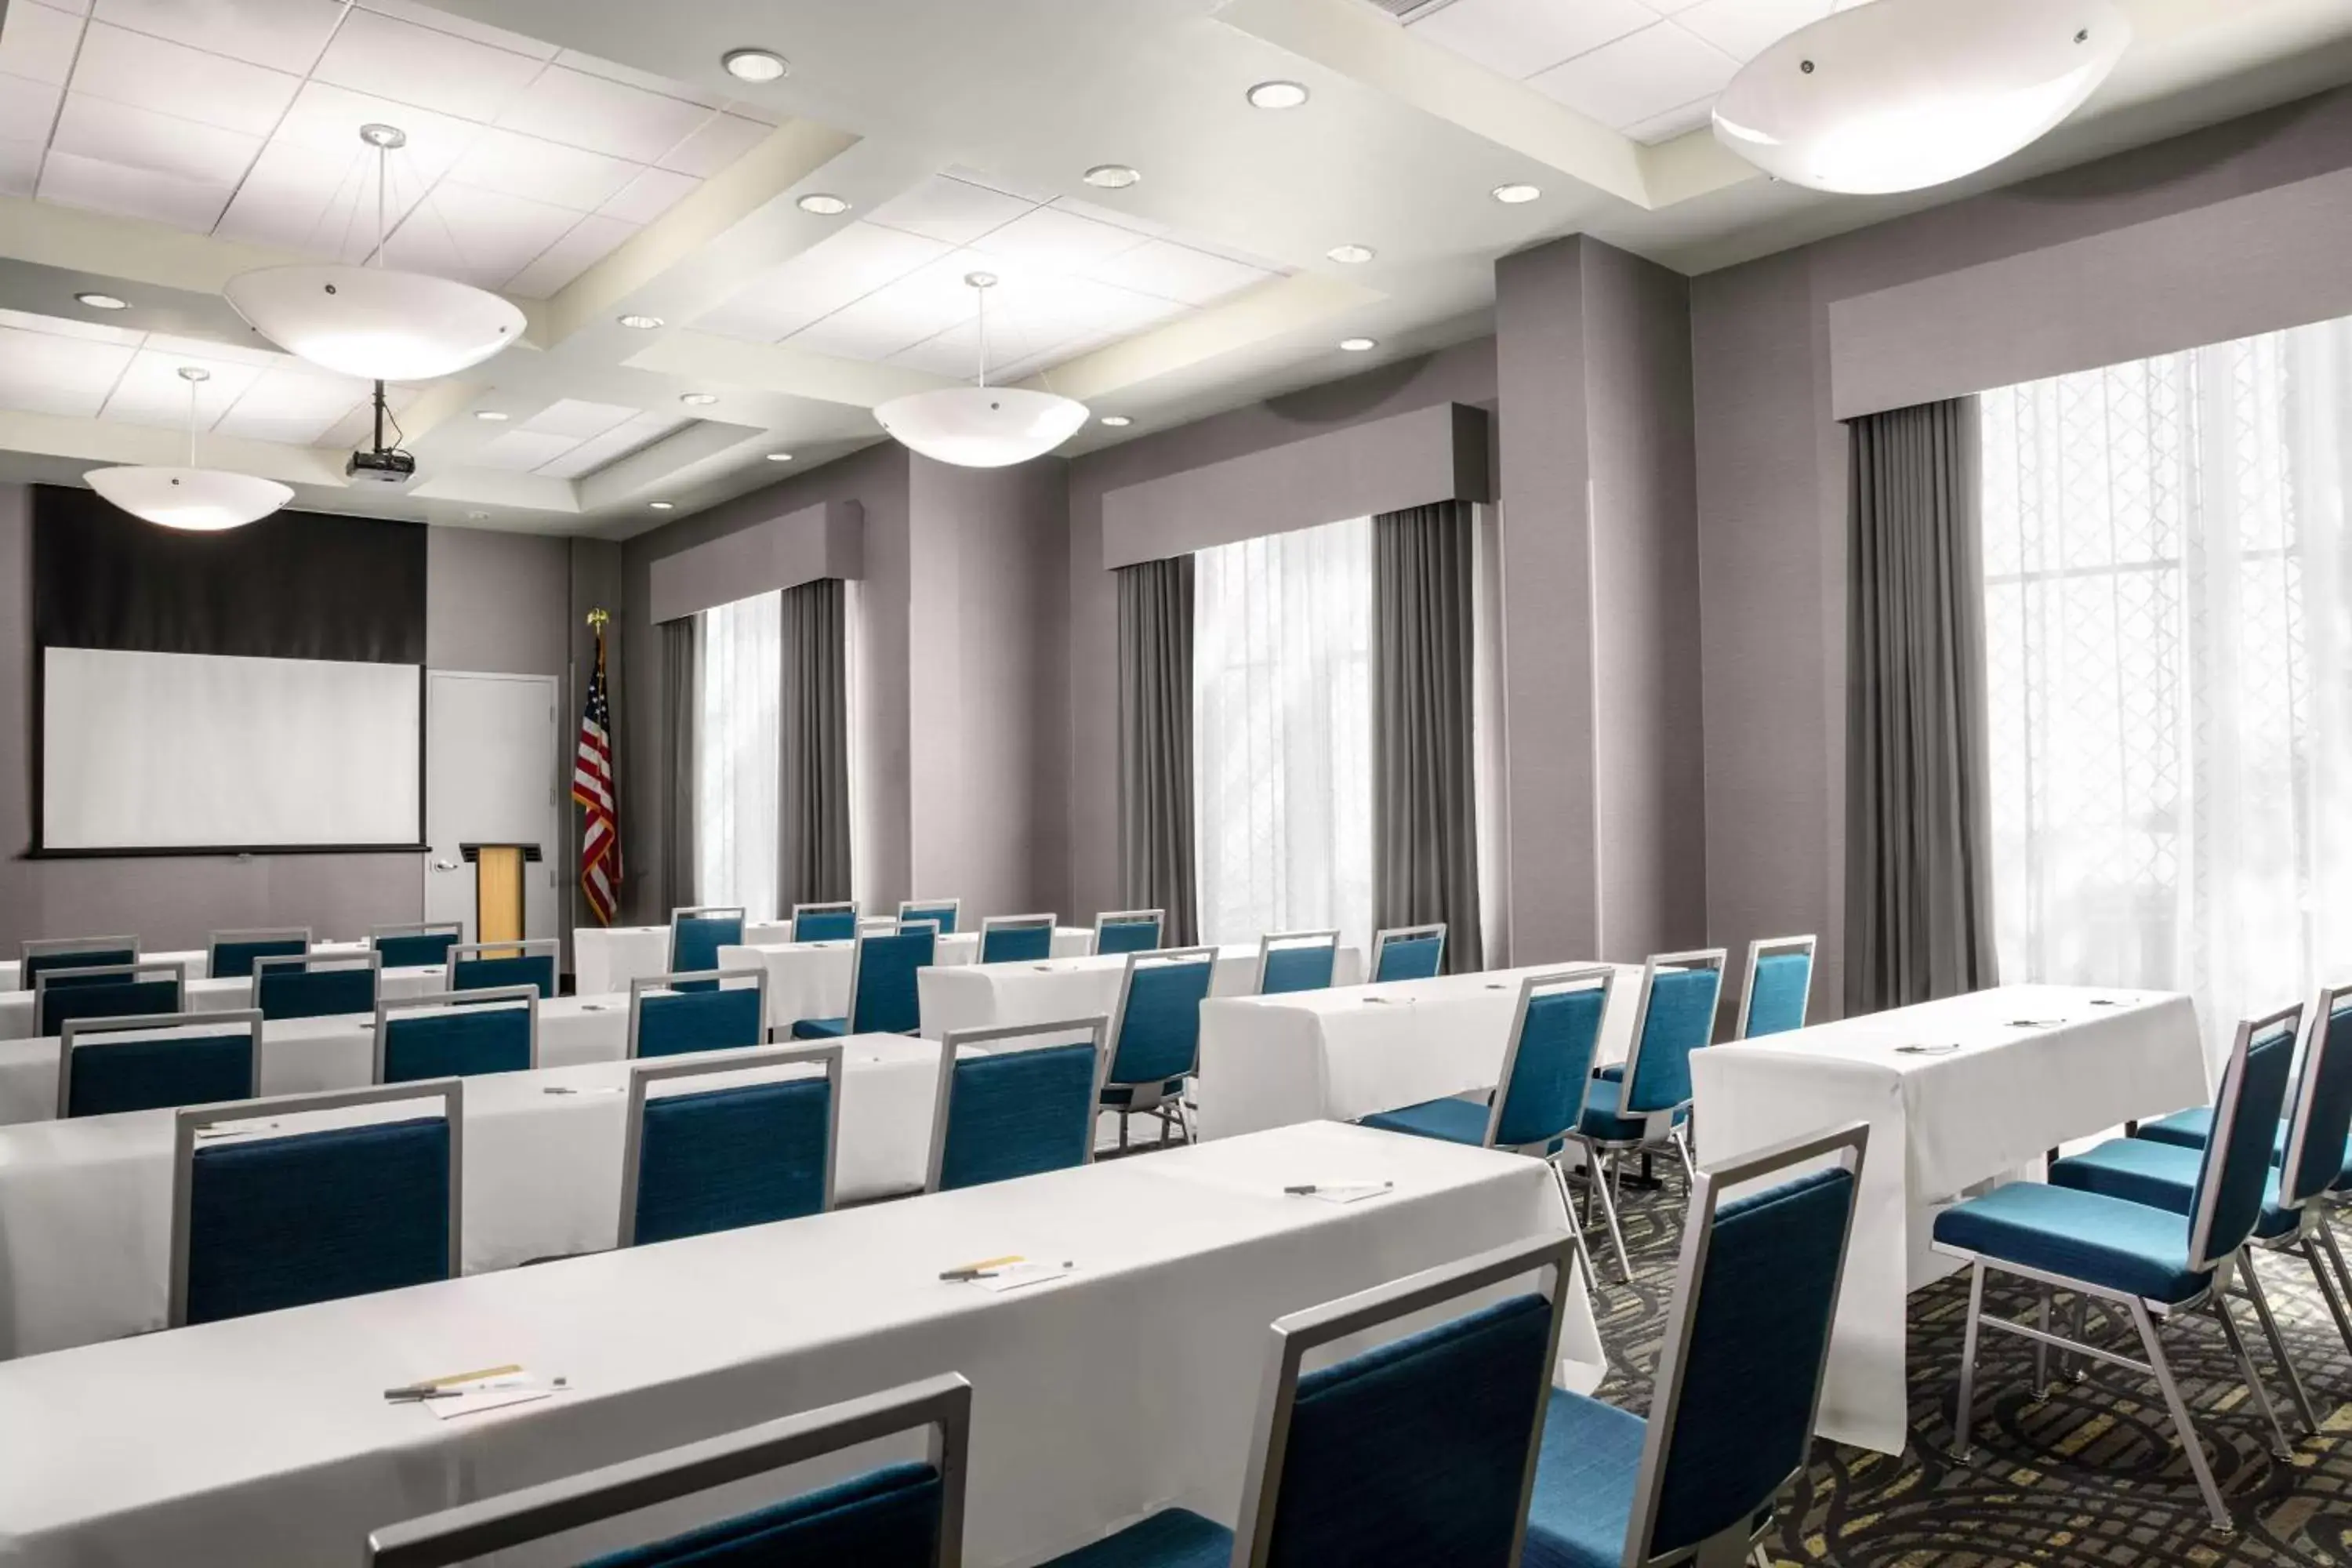 Meeting/conference room in Hampton Inn & Suites Homestead Miami South